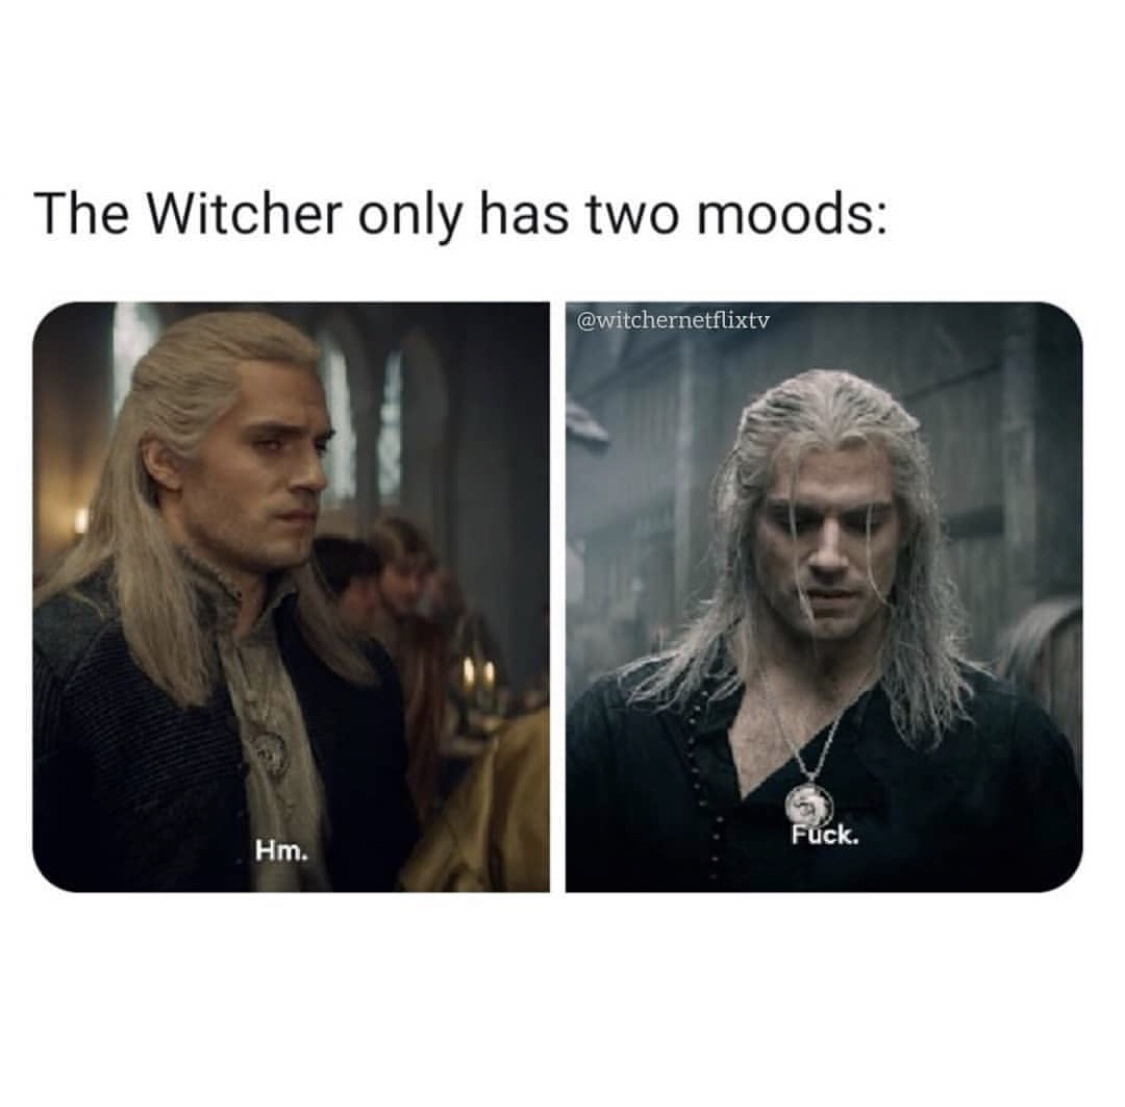 The Witcher - The Witcher only has two moods Fuck. Hm.